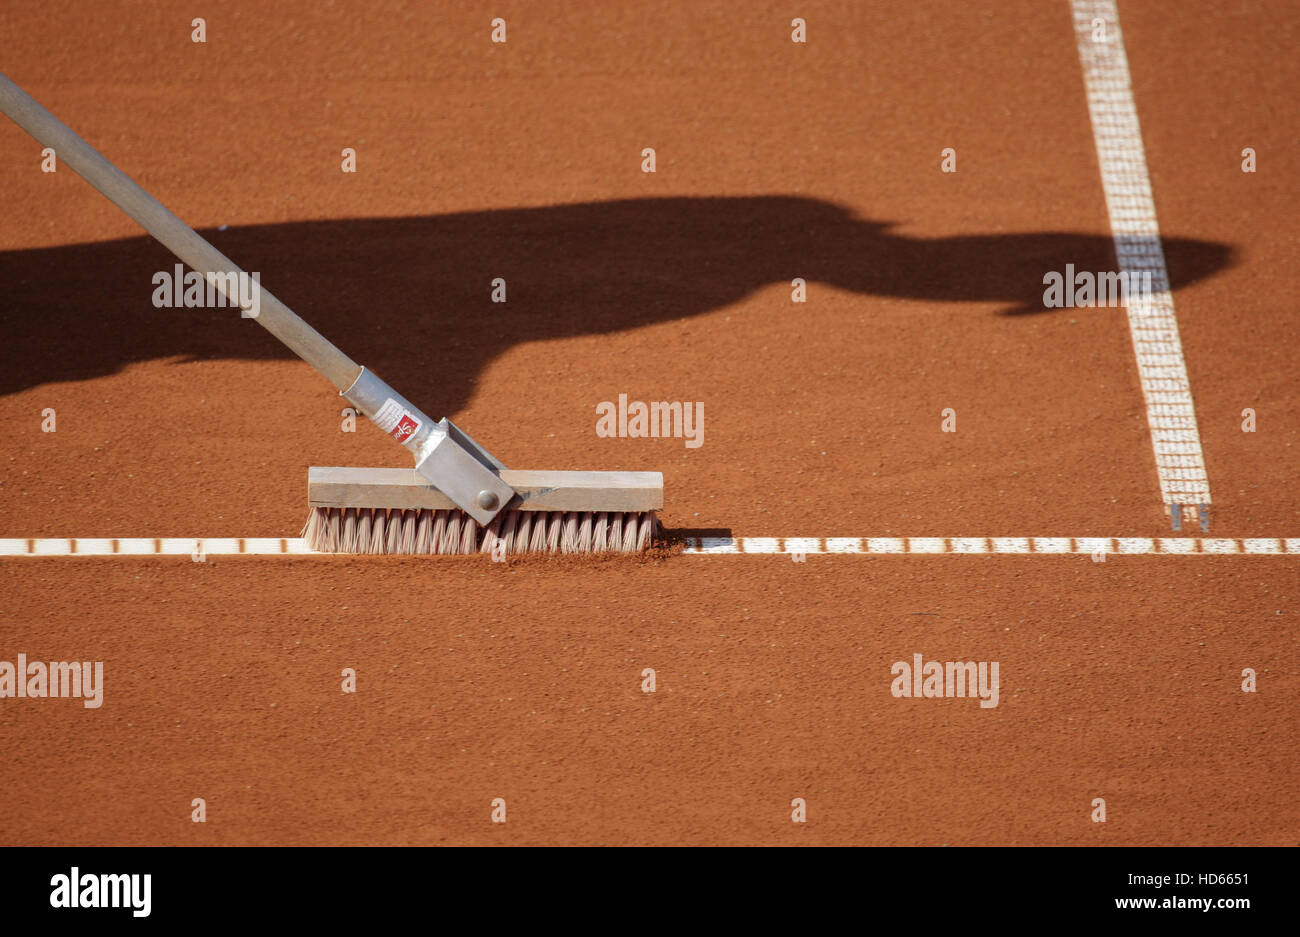 Shadow of a groundsman sweeping the baseline on a tennis court Stock Photo